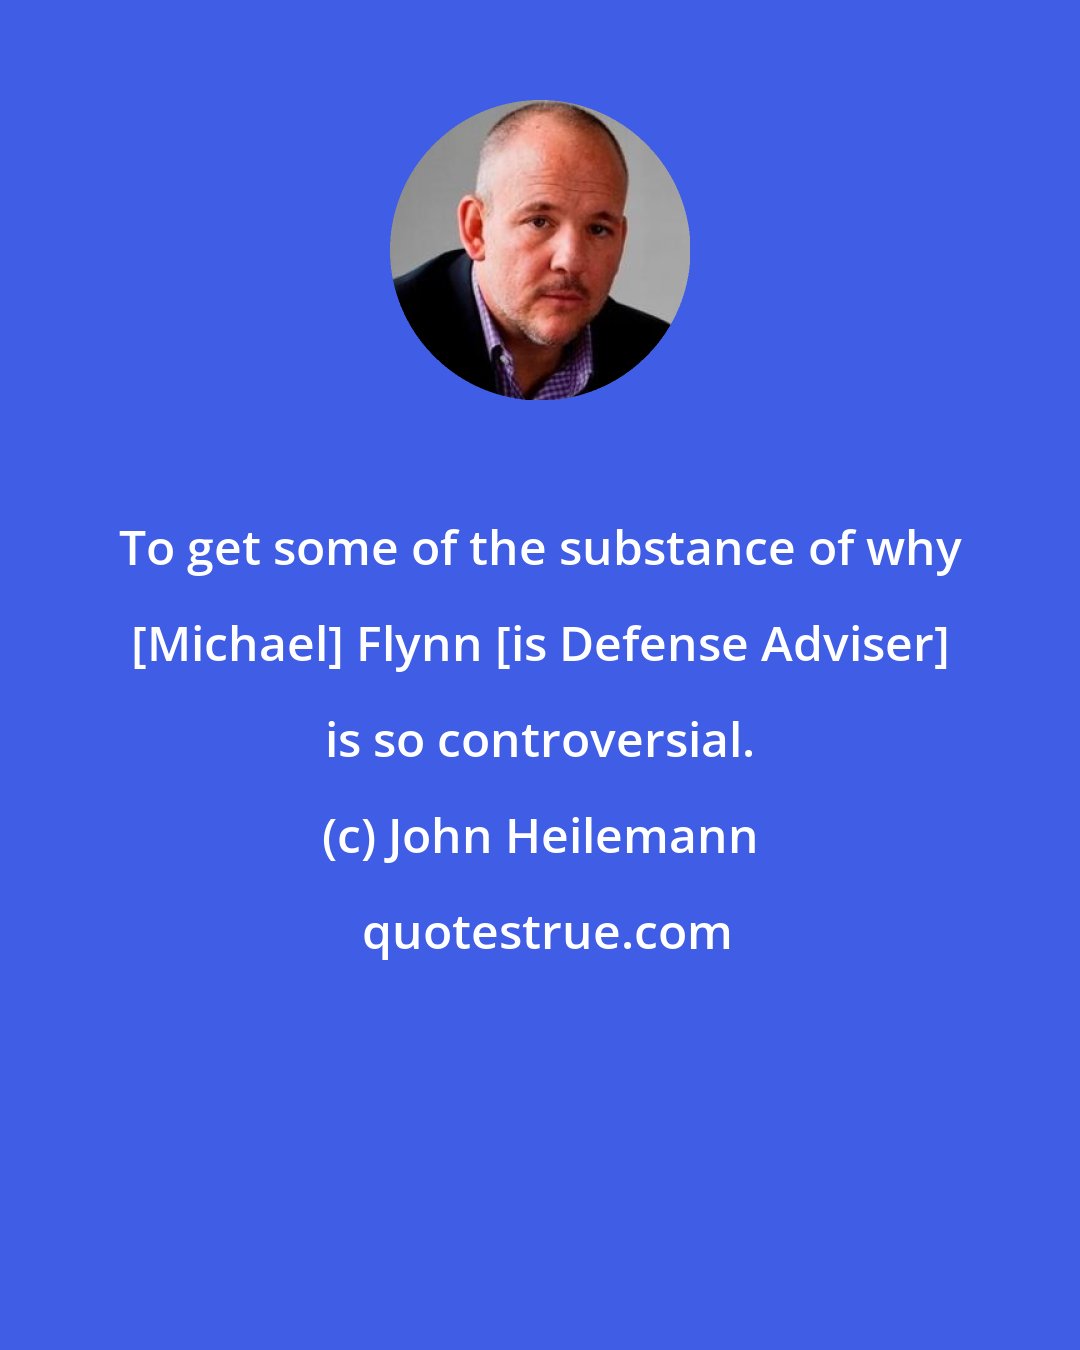 John Heilemann: To get some of the substance of why [Michael] Flynn [is Defense Adviser] is so controversial.